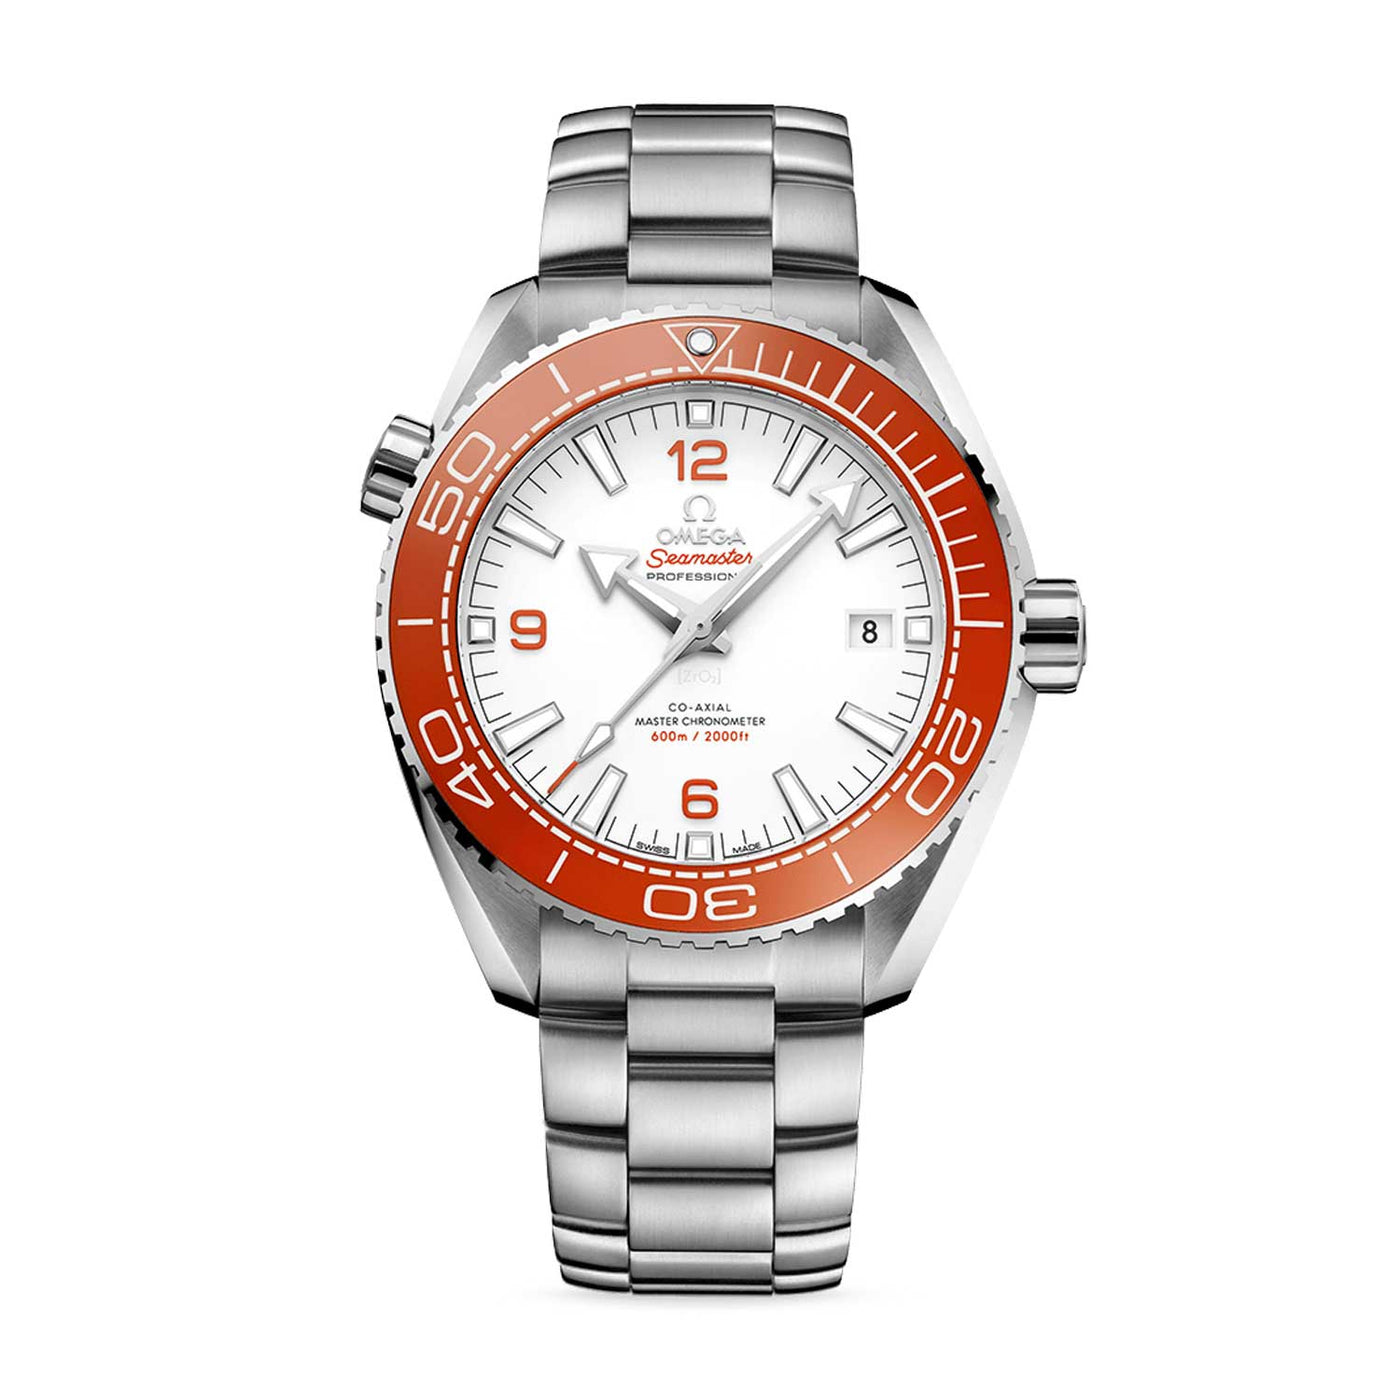 OMEGA Seamaster Planet Ocean 600m Automatic – 215.30.44.21.04.001